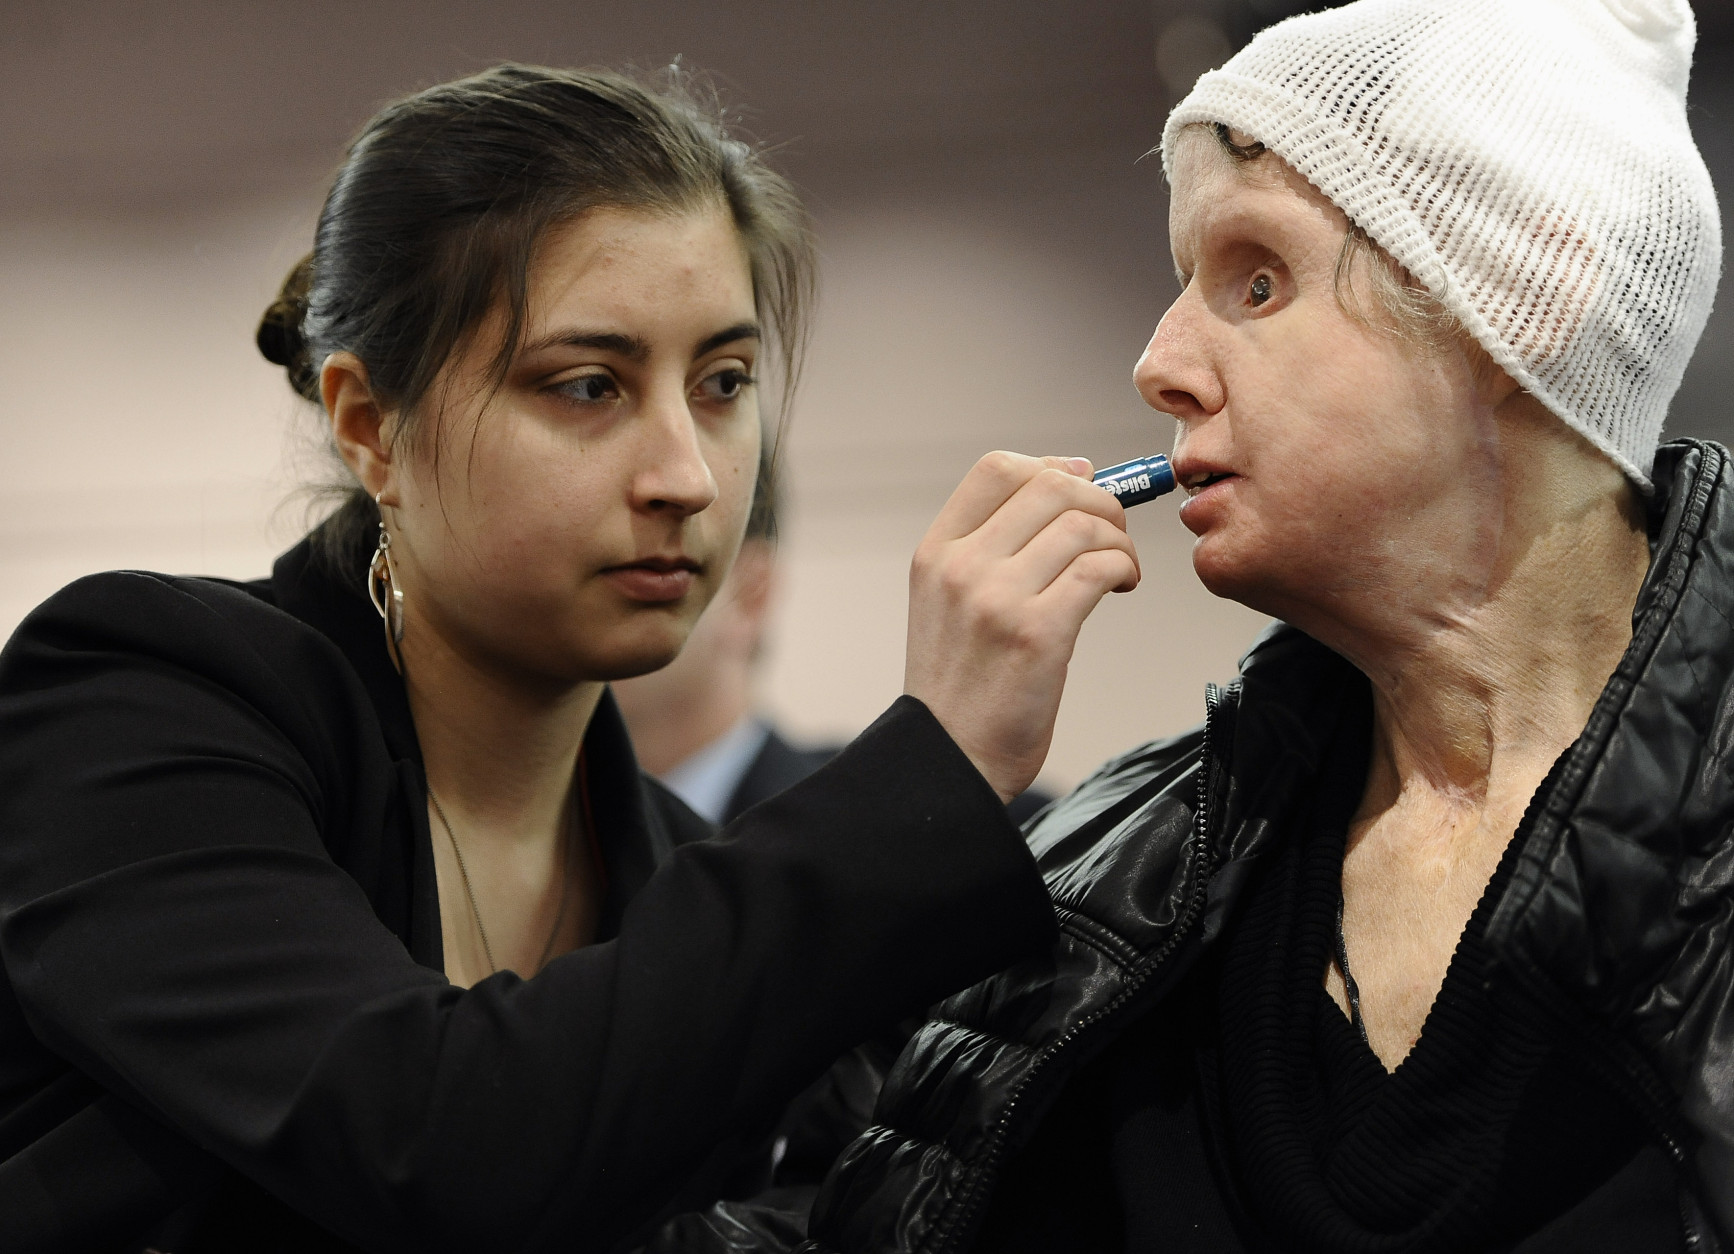 FOR USE AS DESIRED, YEAR END PHOTOS - FILE - Briana Nash, left, helps her mother Charla Nash, apply lip balm before speaking to Connecticut legislators at a public hearing at the Legislative Office Building, Friday, March 21, 2014, in Hartford, Conn. Nash was mauled by a friend's chimpanzee in 2009.  (AP Photo/Jessica Hill, File)